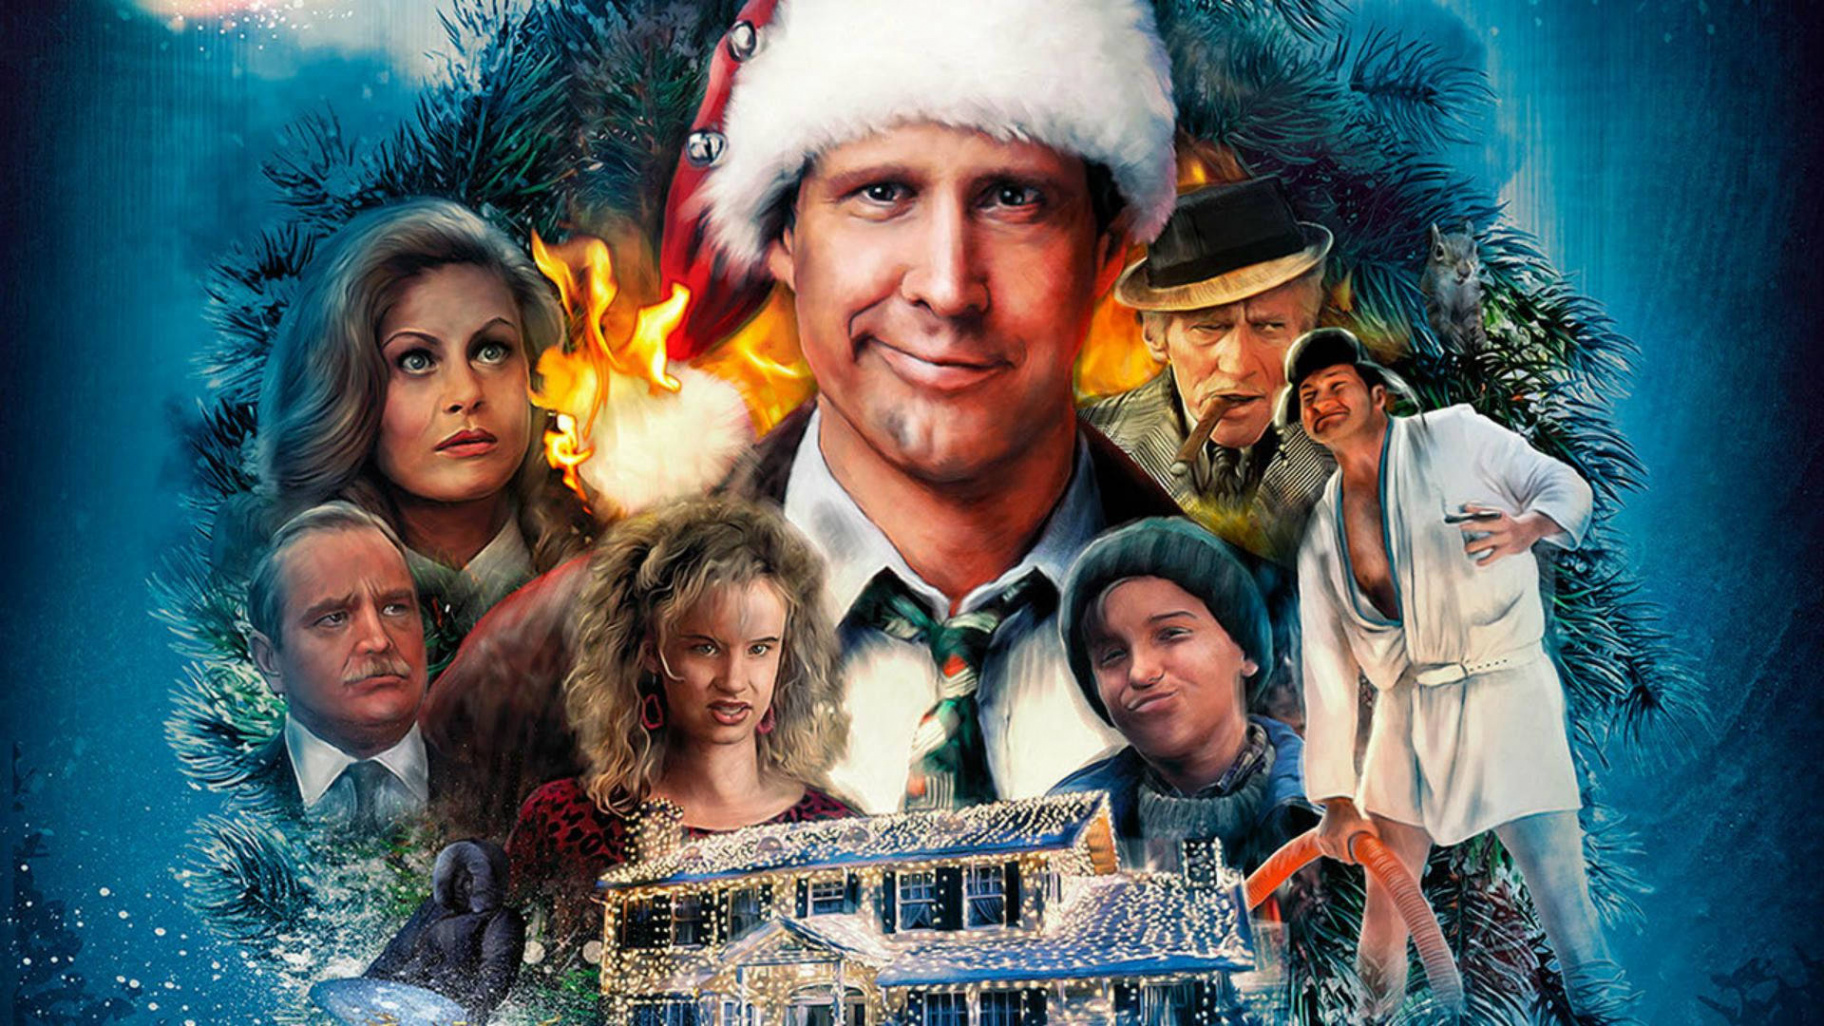 Download Christmas Movie National Lampoon